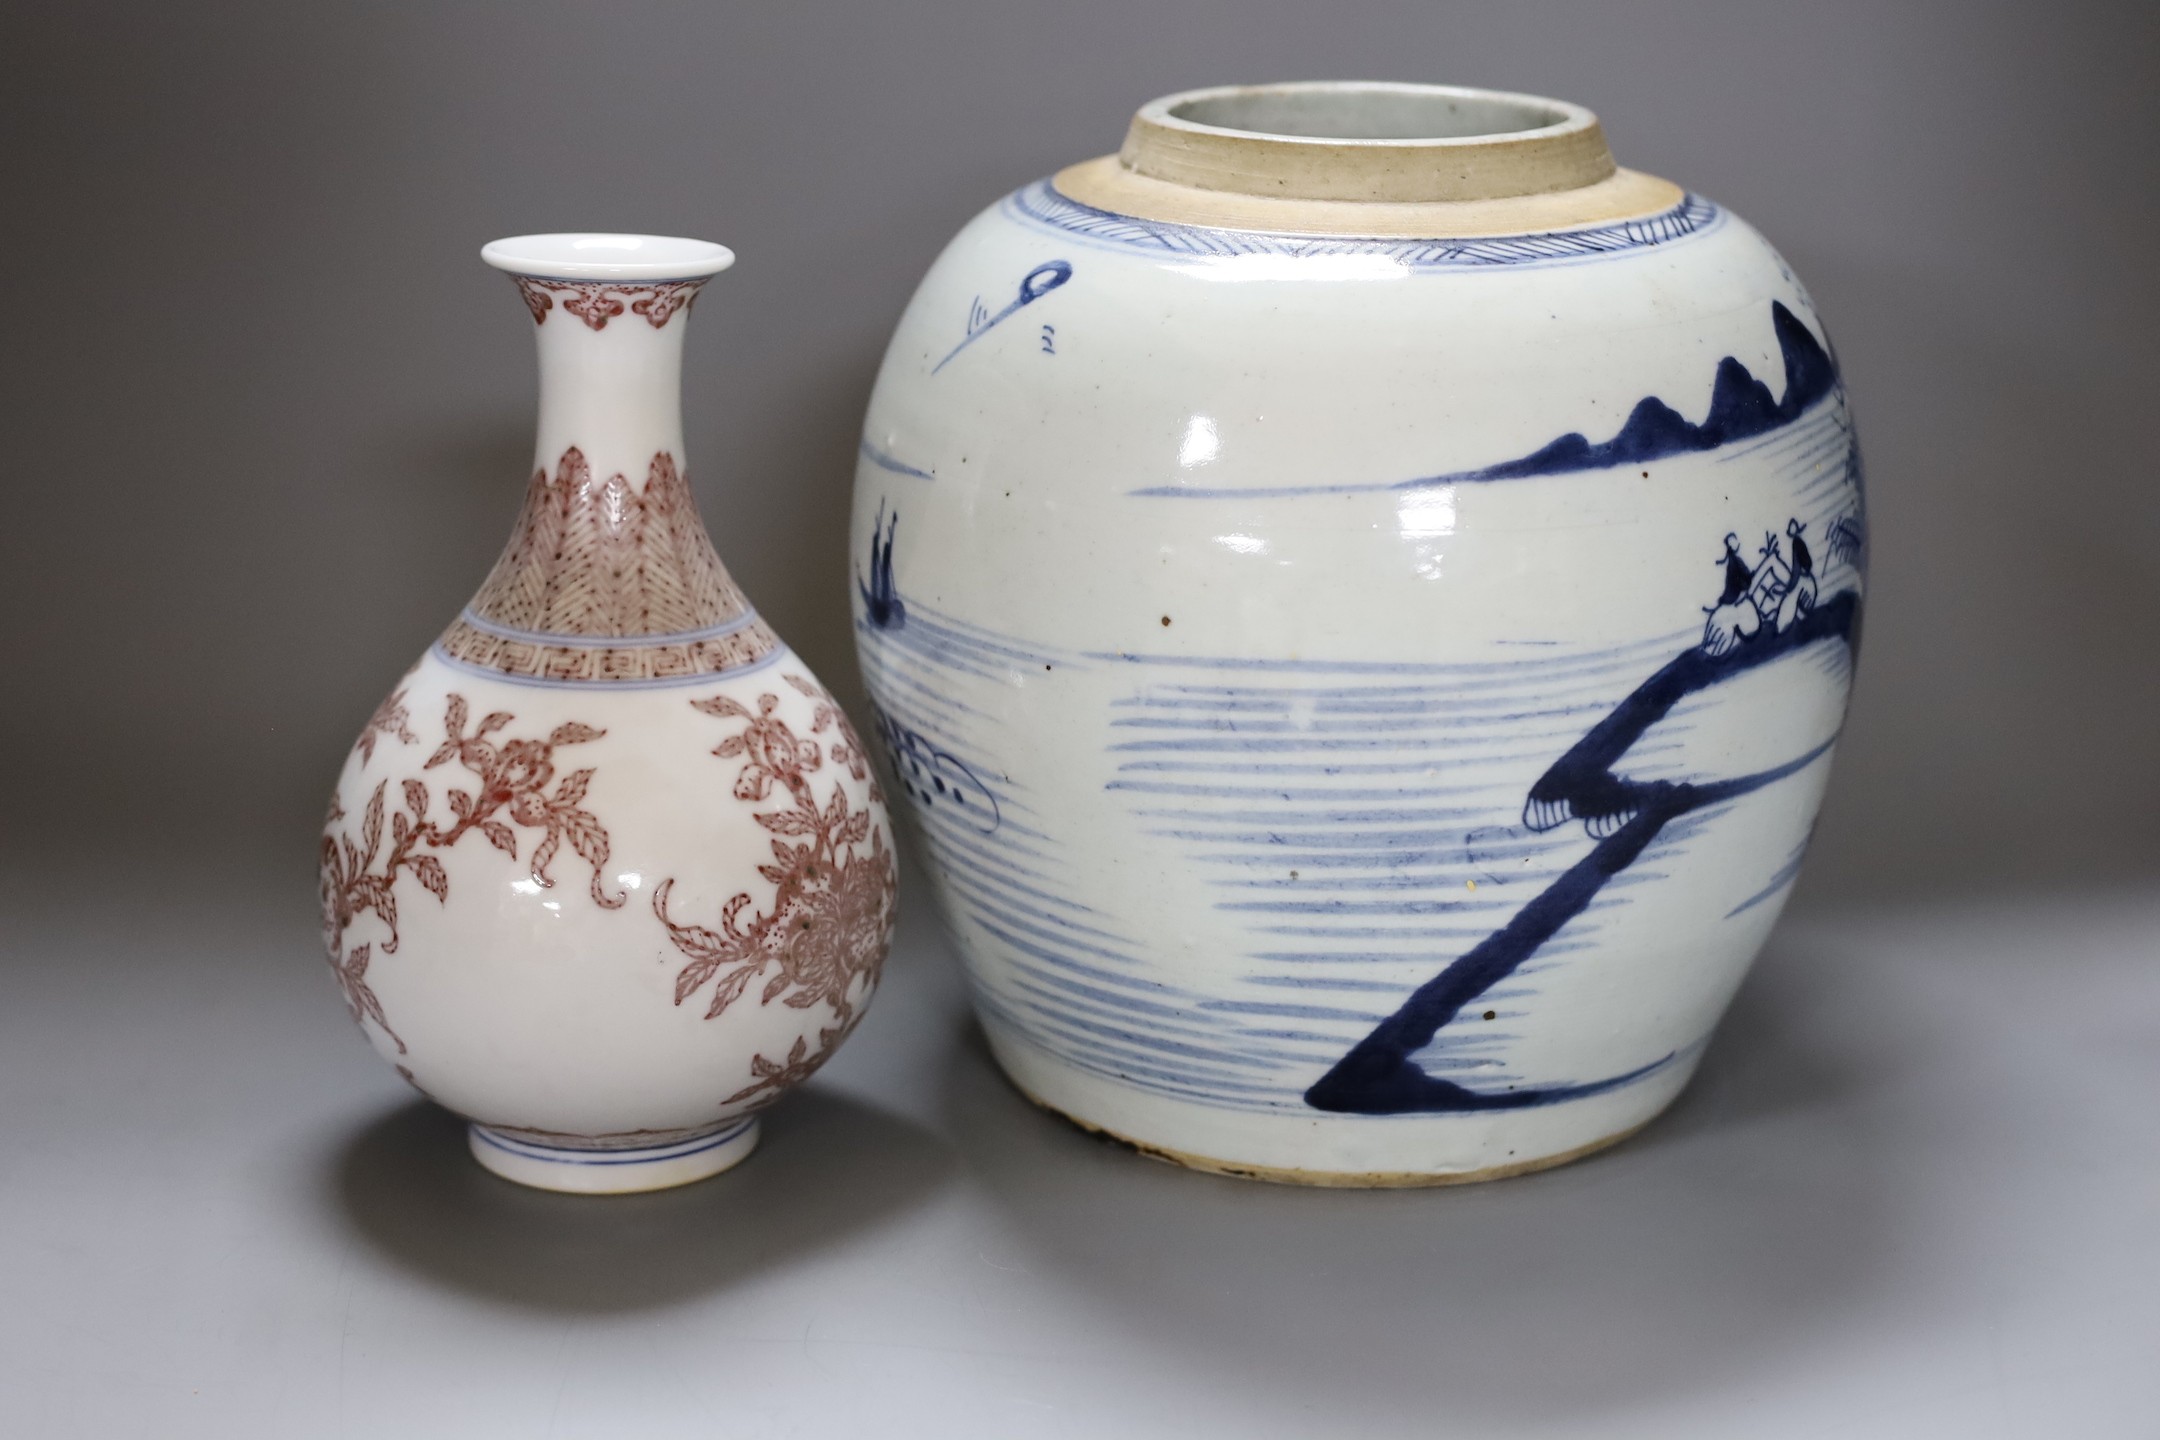 A Chinese Qing blue and white ginger jar with a painted landscape and a blue and copper-red pear shaped vase, tallest 22cm